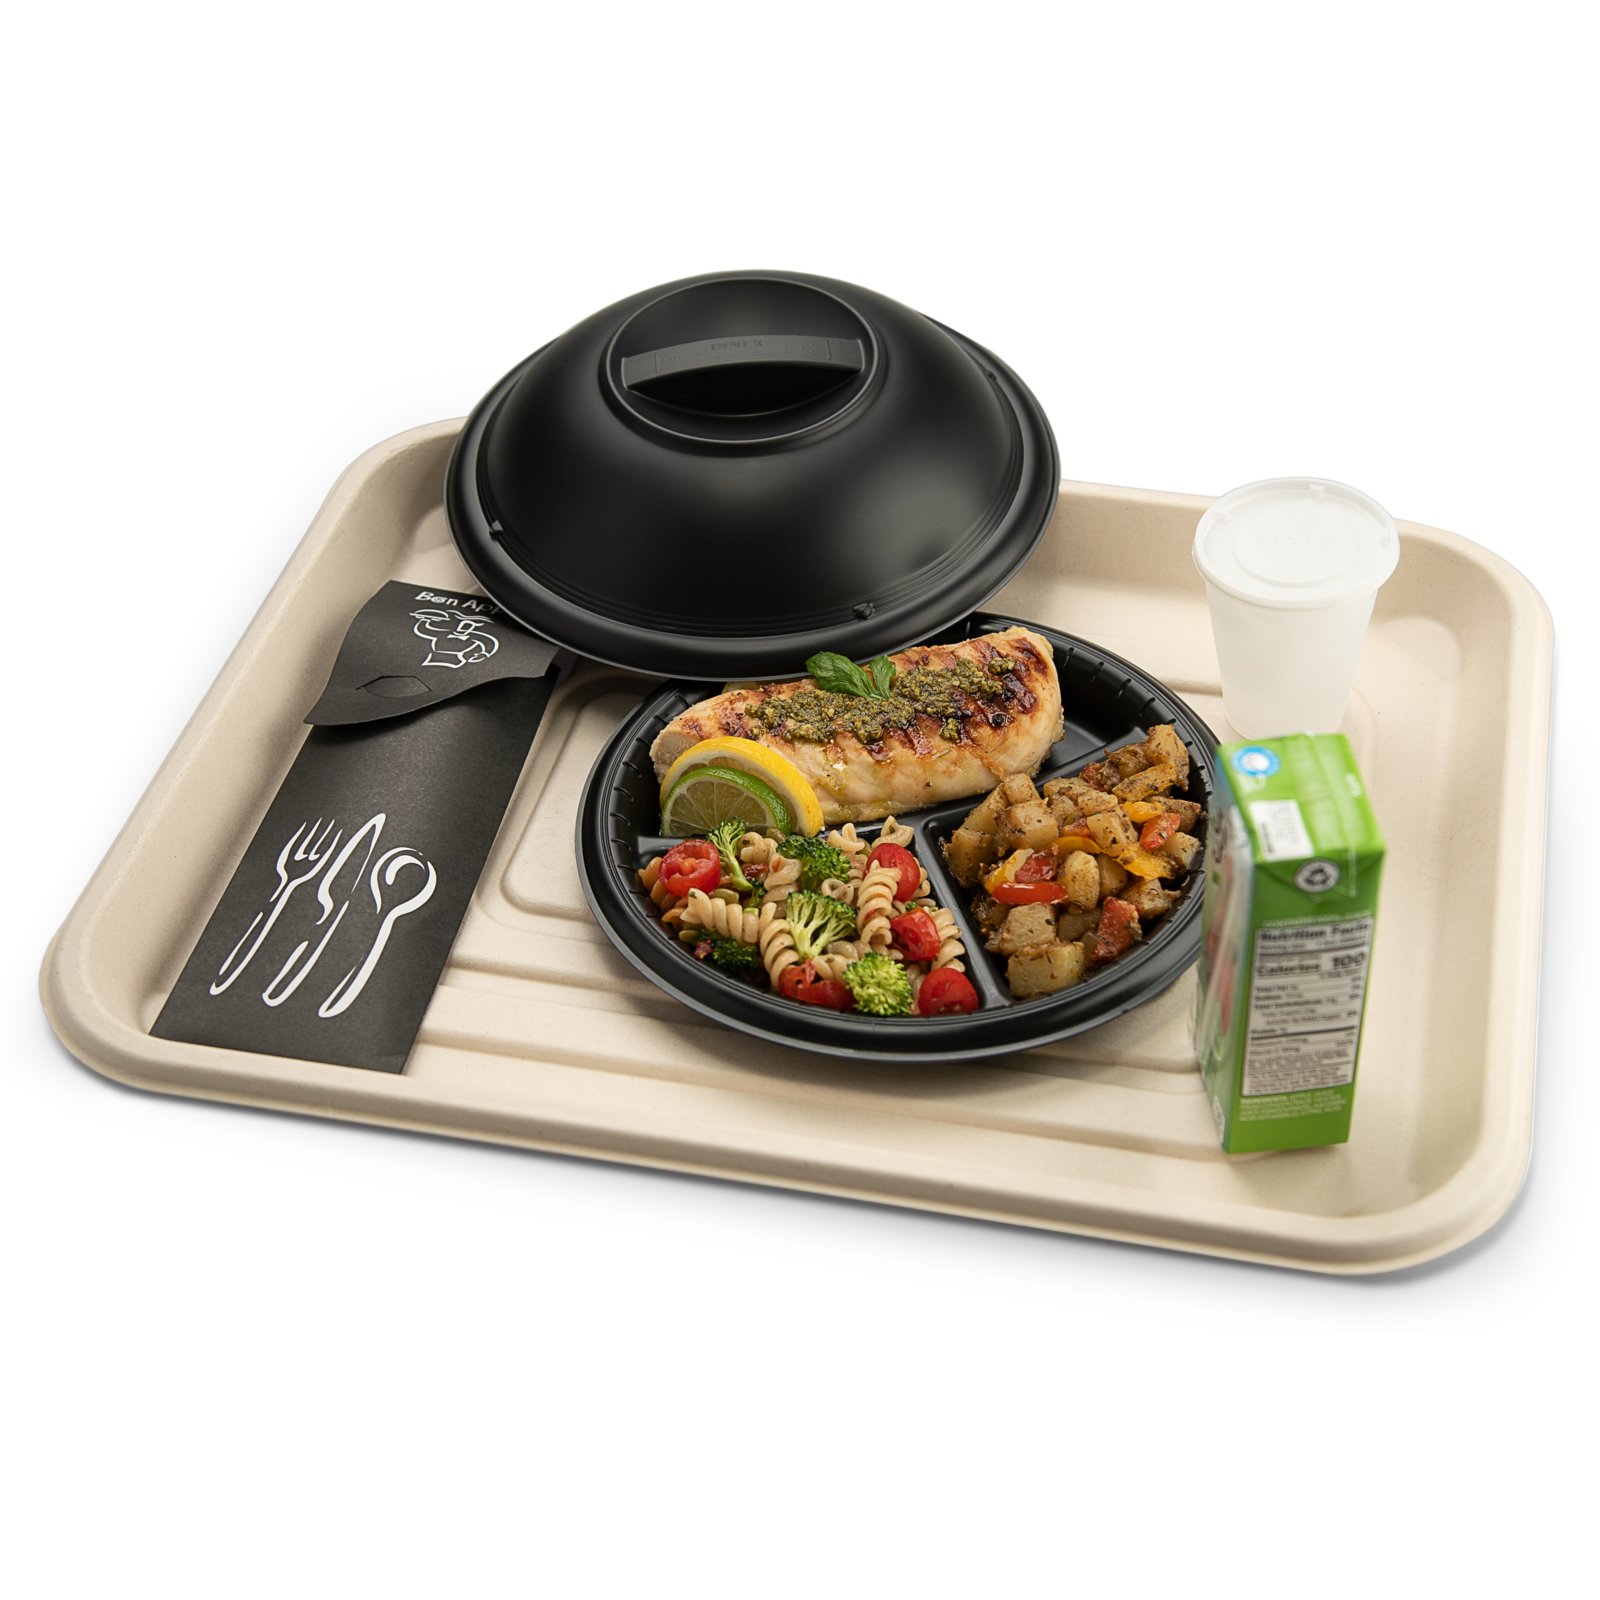 High Heat Disposable Dishware  Carlisle FoodService Products